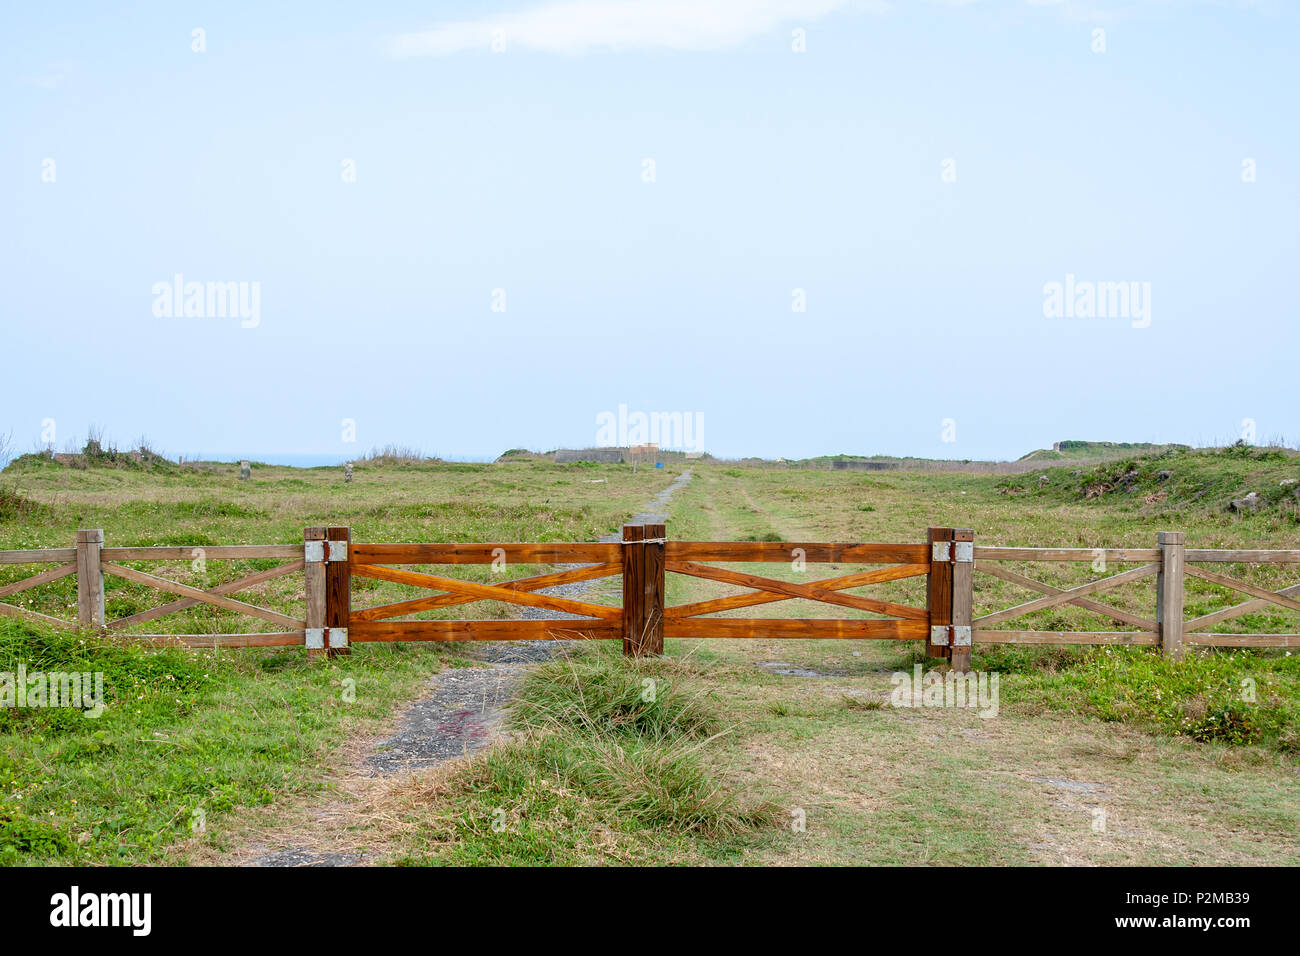 Wooden farm gate and fence on open land. Entrance closed, shut, overlooking plain ground, blue sky, countryside, Hualien County, Taiwan Stock Photo